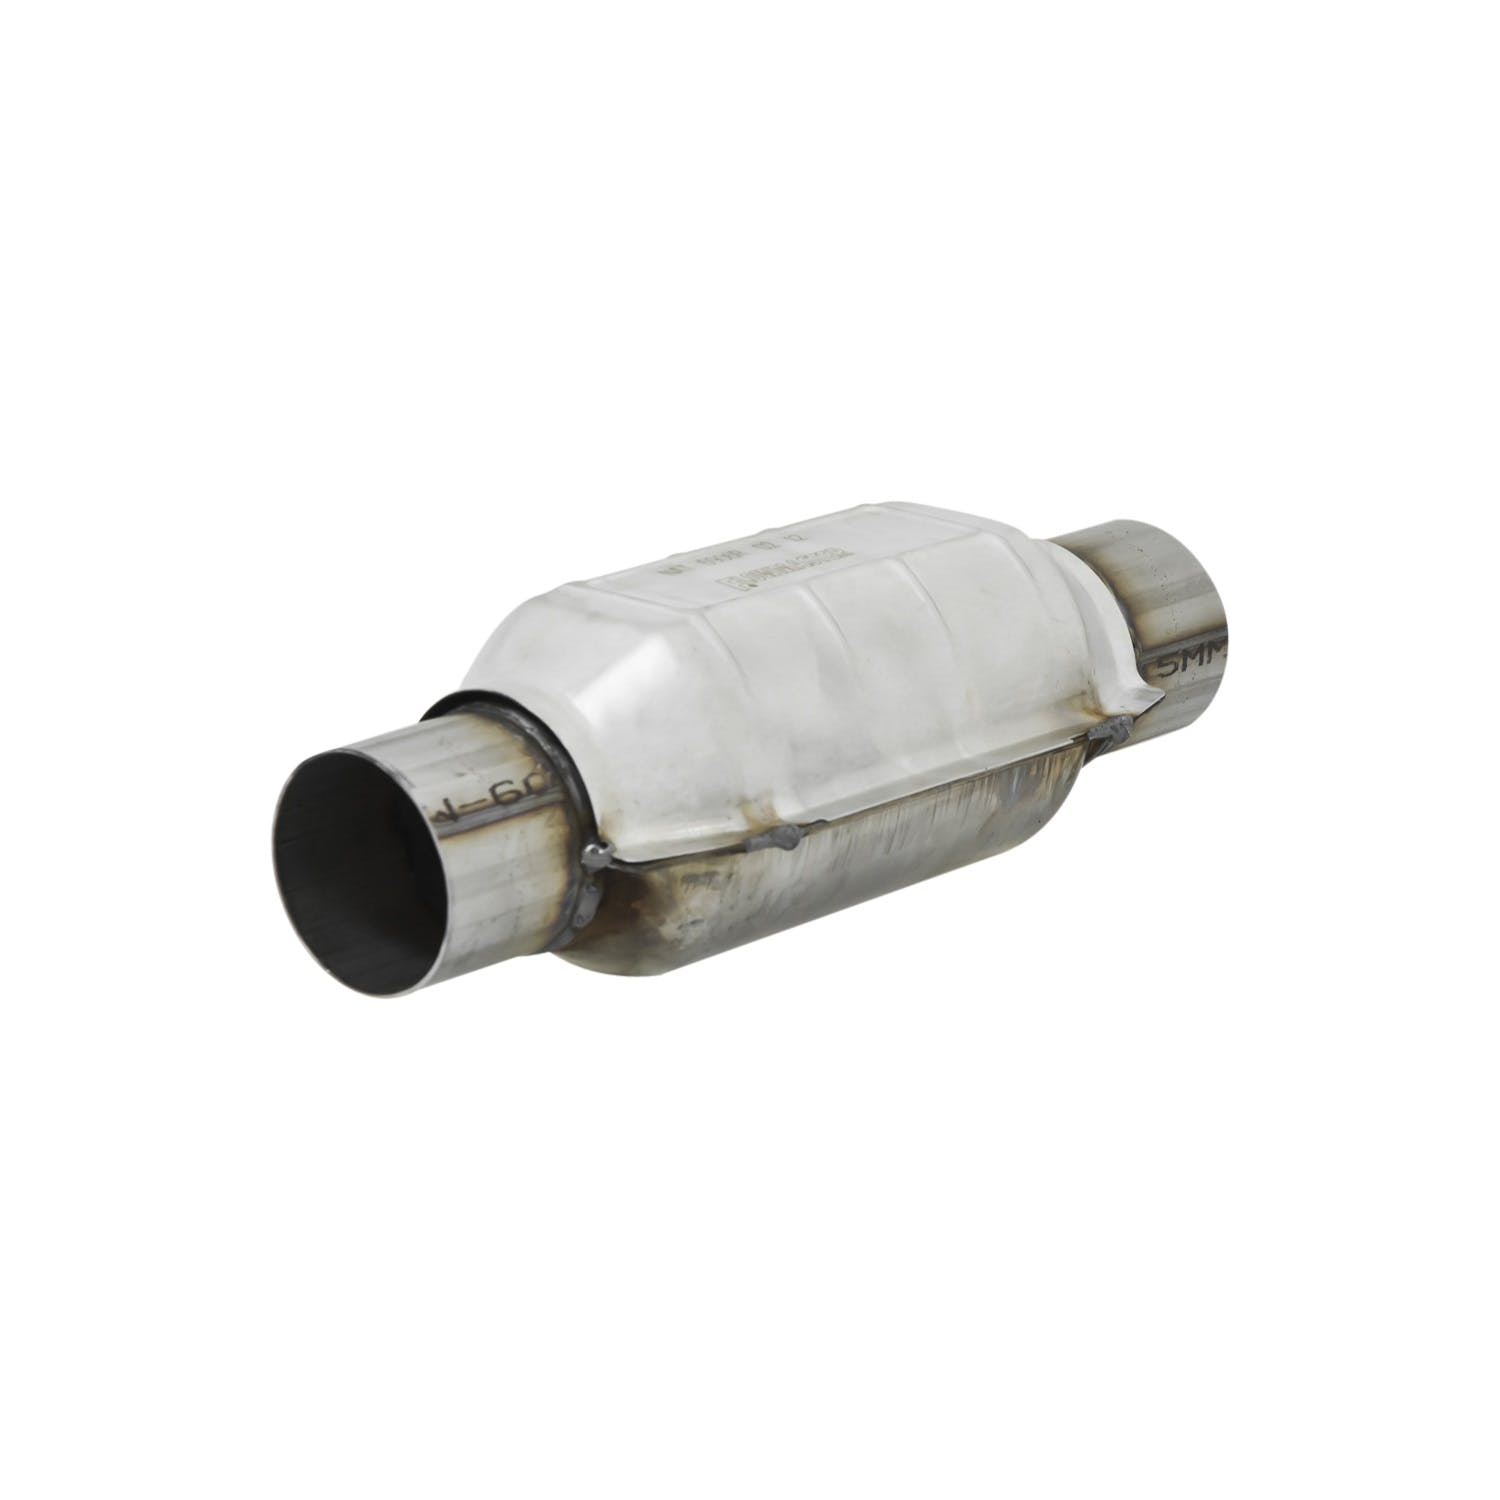 Flowmaster Catalytic Converters 2220124 Catalytic Converter-Universal-222 Series-2.25 in. Inlet/Outlet-49 State